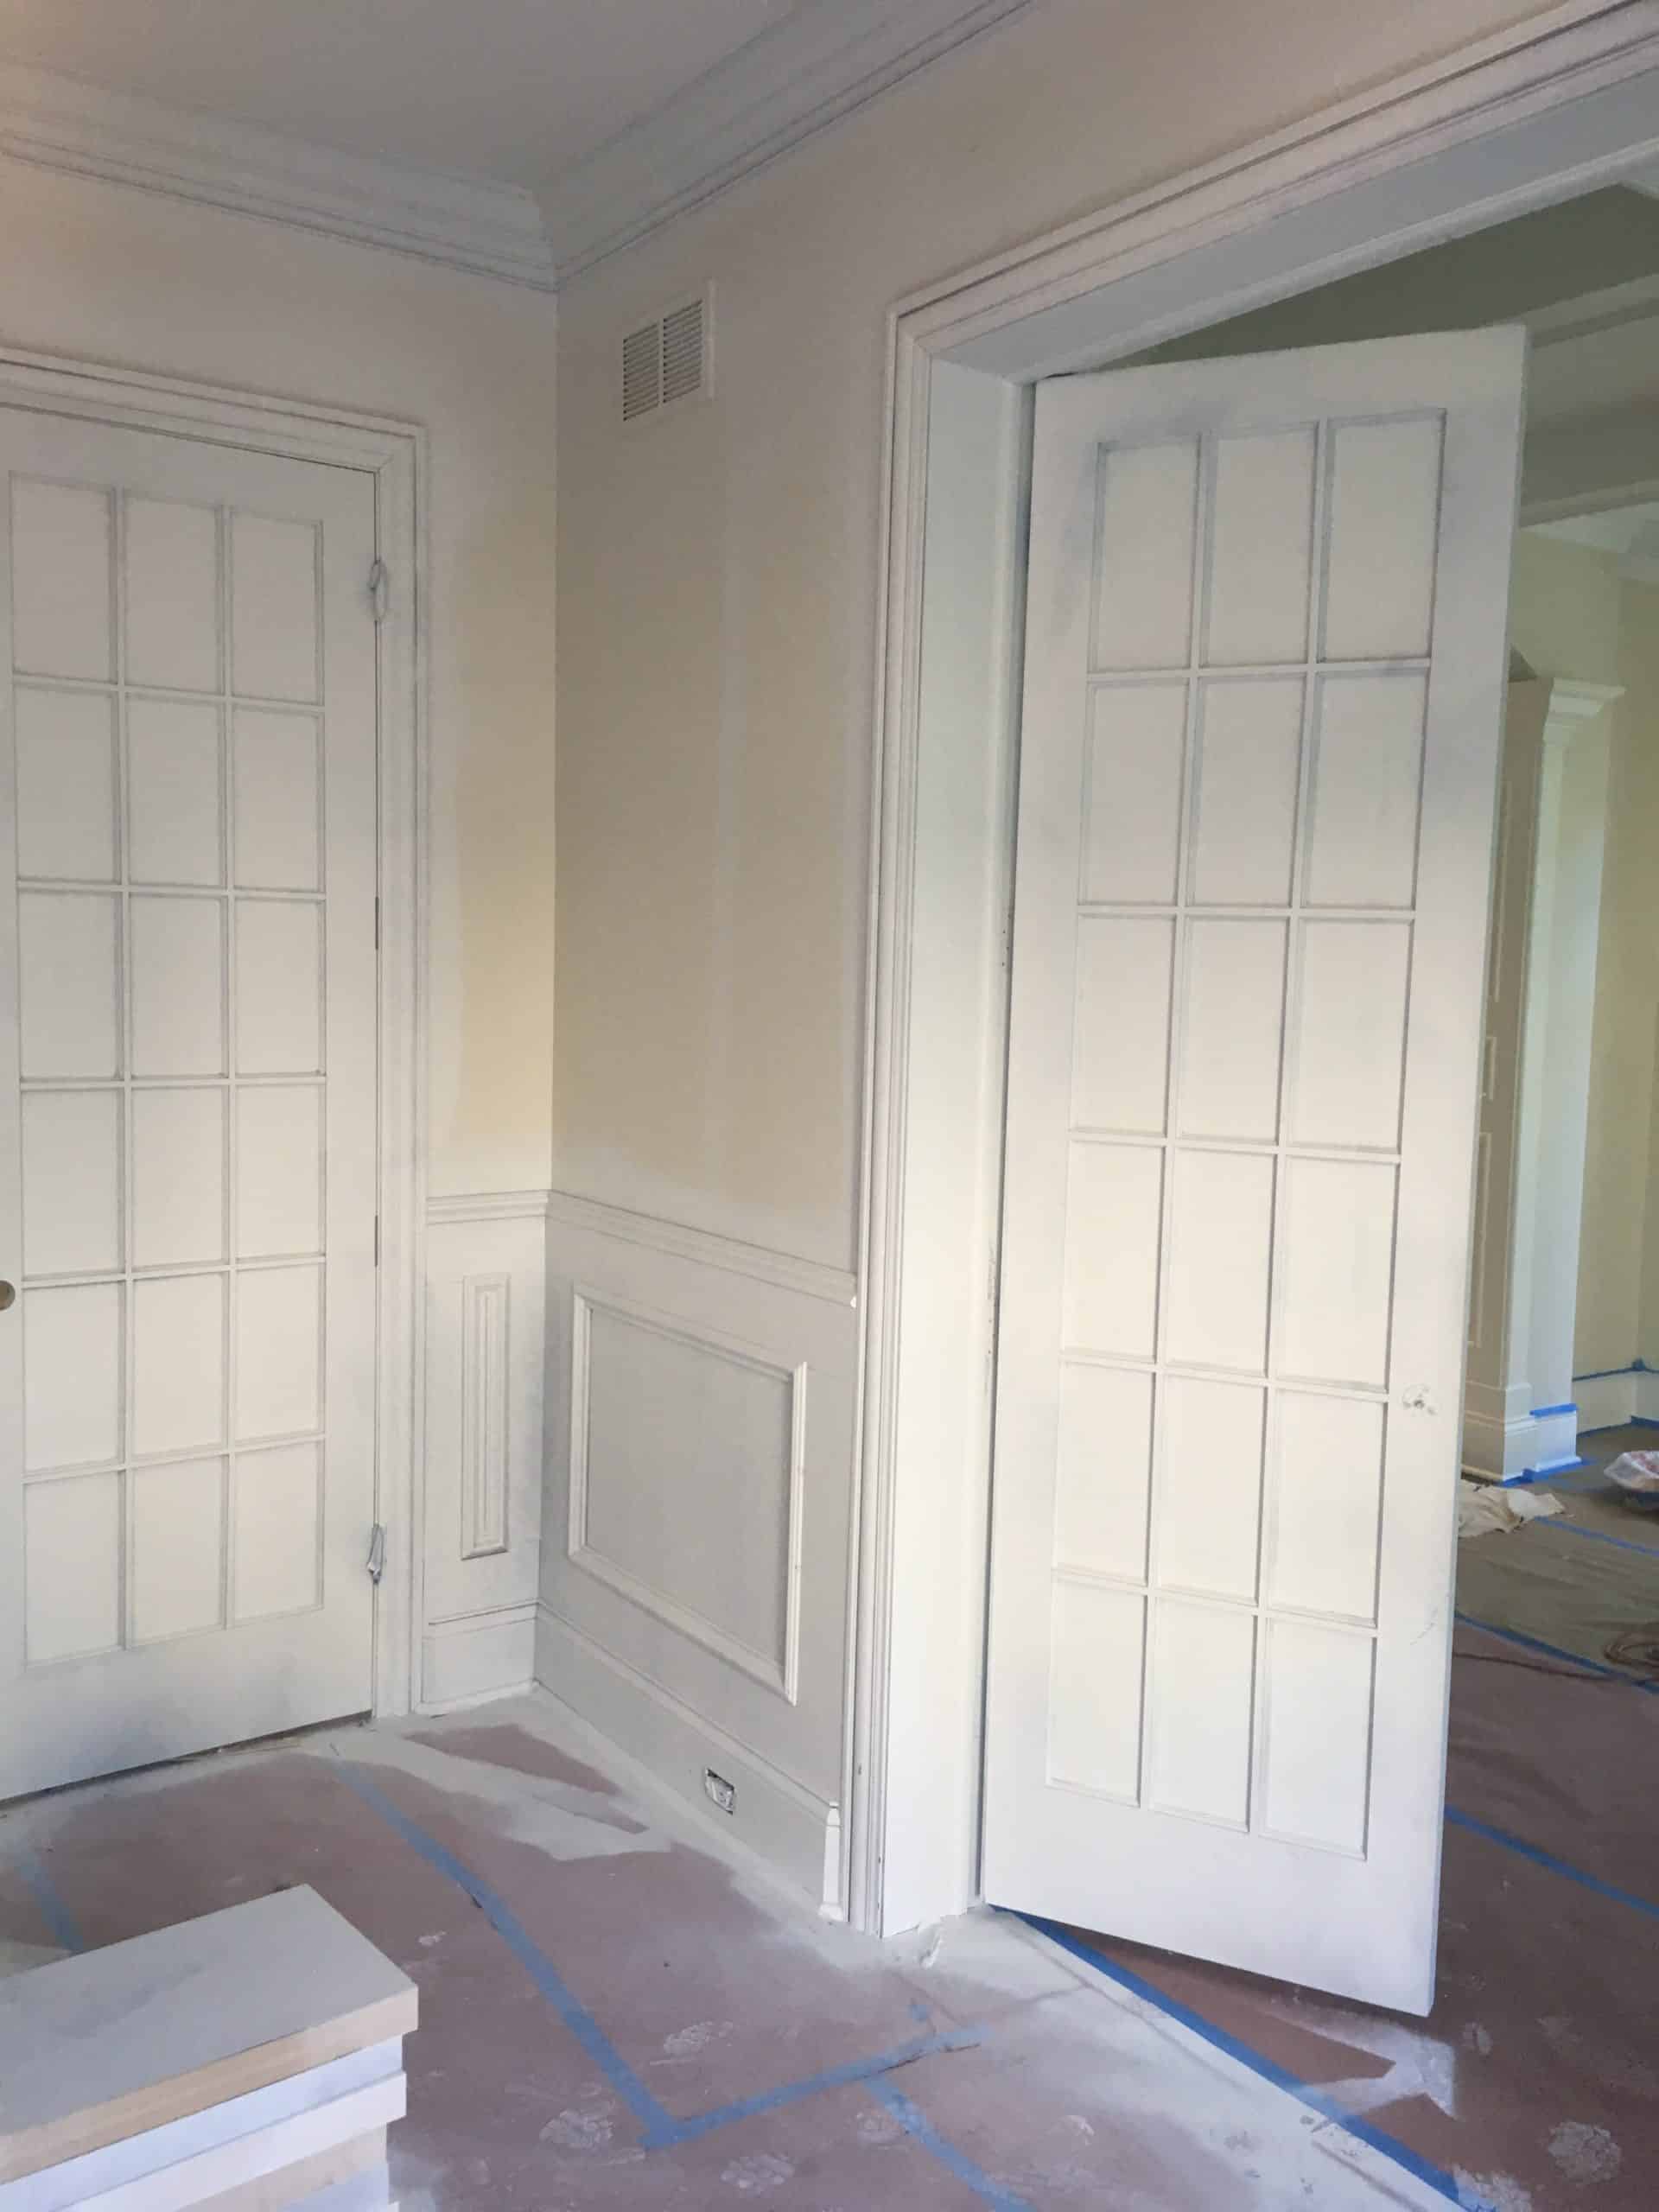 Wall and doors being prepared to be painted